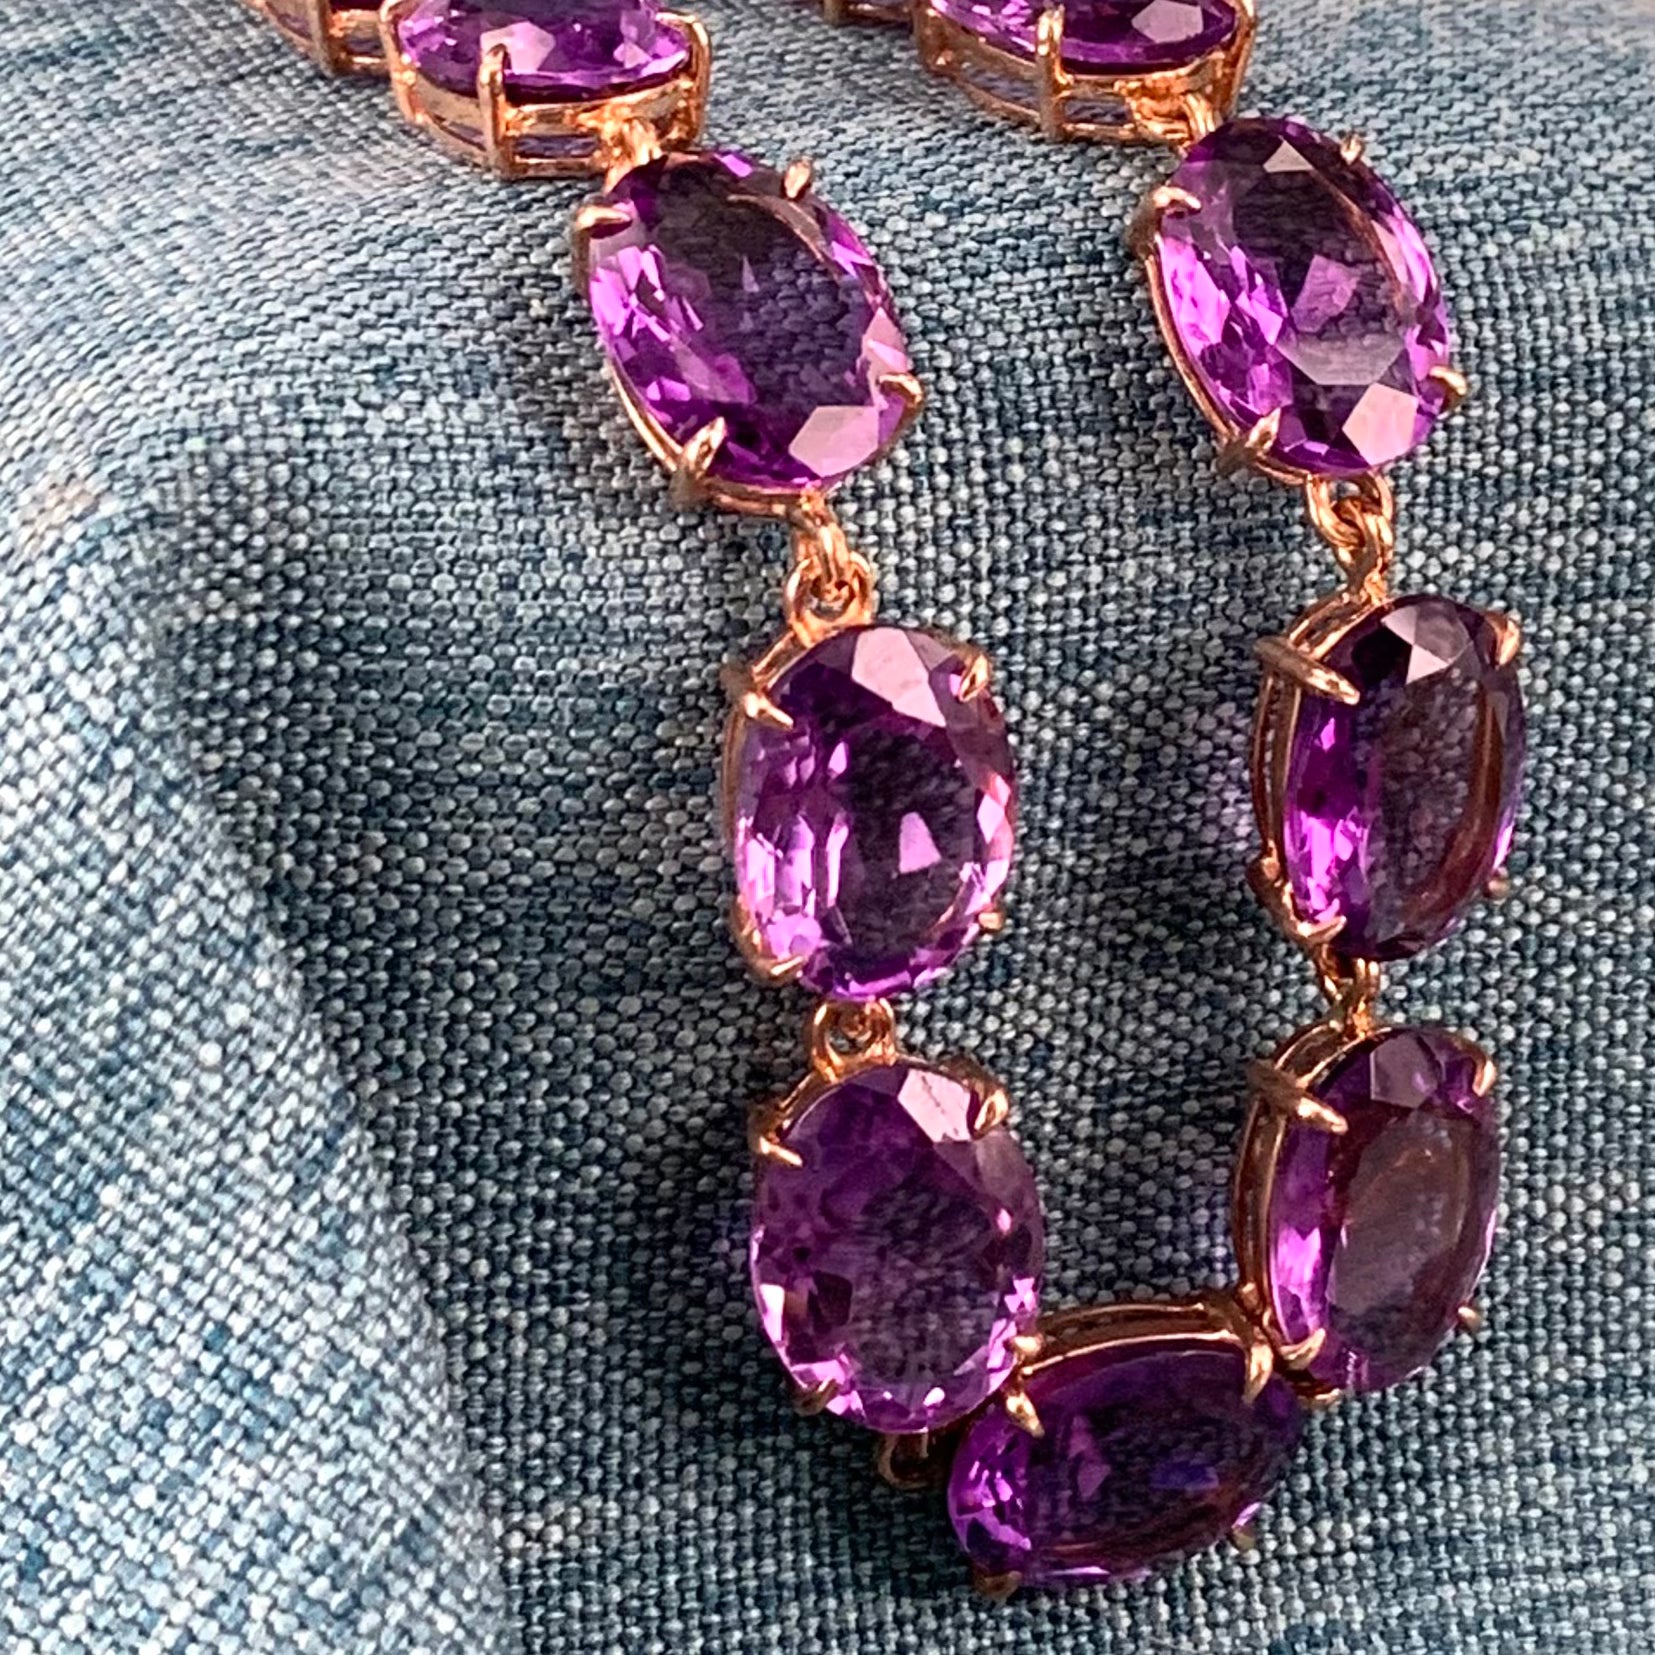 Exquisite Amethyst Gemstone Jewelry Set Inspired by Anna Wintour's Style - Baza Boutique 